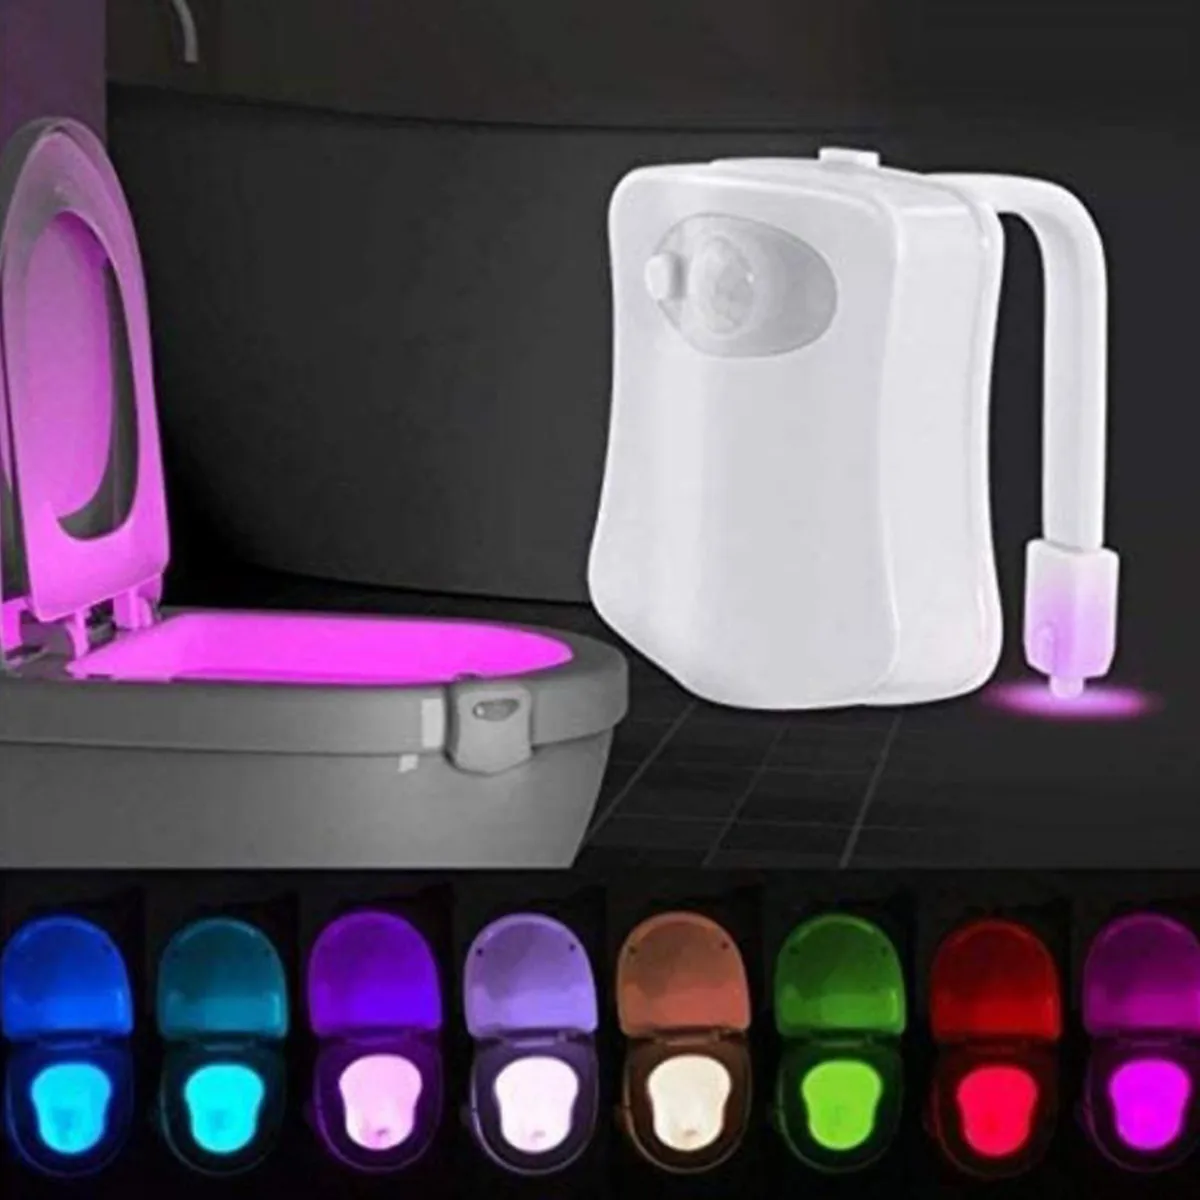 8 Or 16 Colors Bathroom Glow Bowl Toilet Light Motion Sensor Battery  Powered Automatic LED Night Lamp Waterproof - Buy 8 Or 16 Colors Bathroom  Glow Bowl Toilet Light Motion Sensor Battery